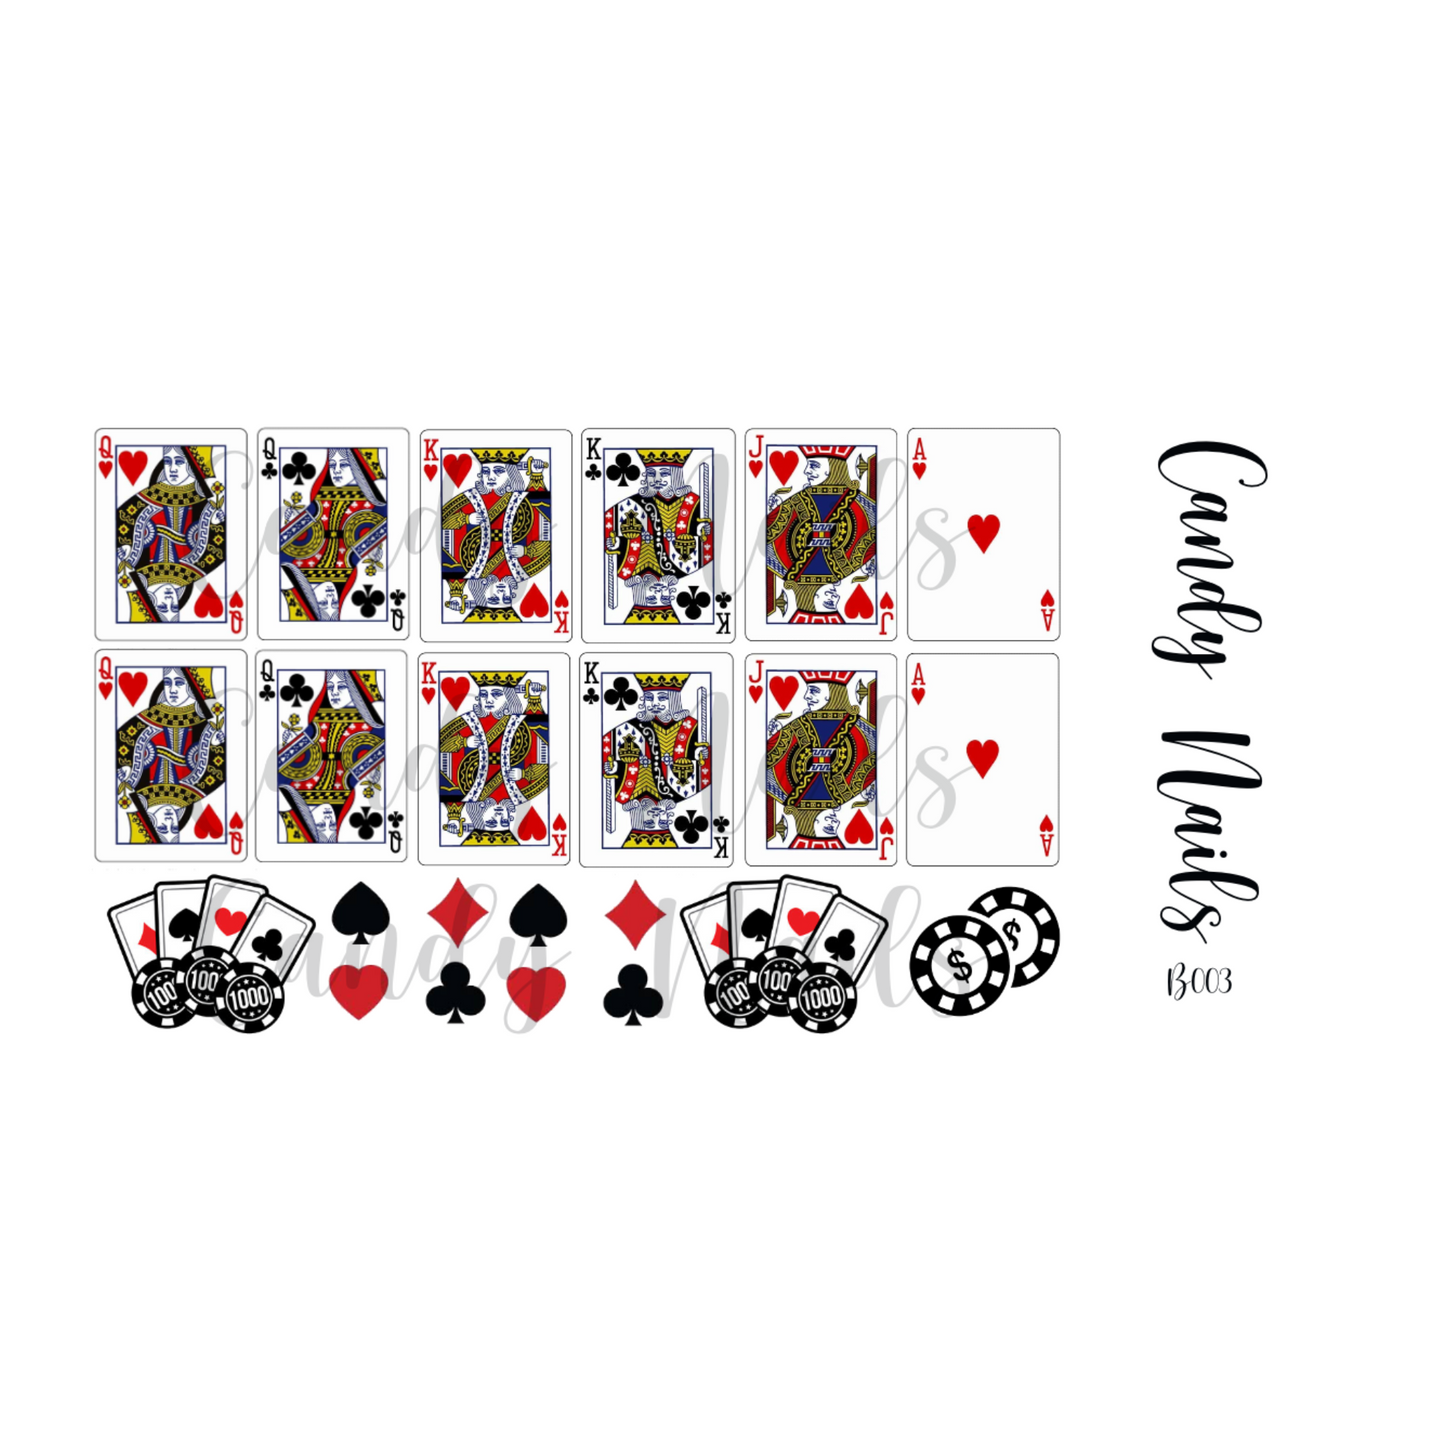 PLAYING CARDS (B003)